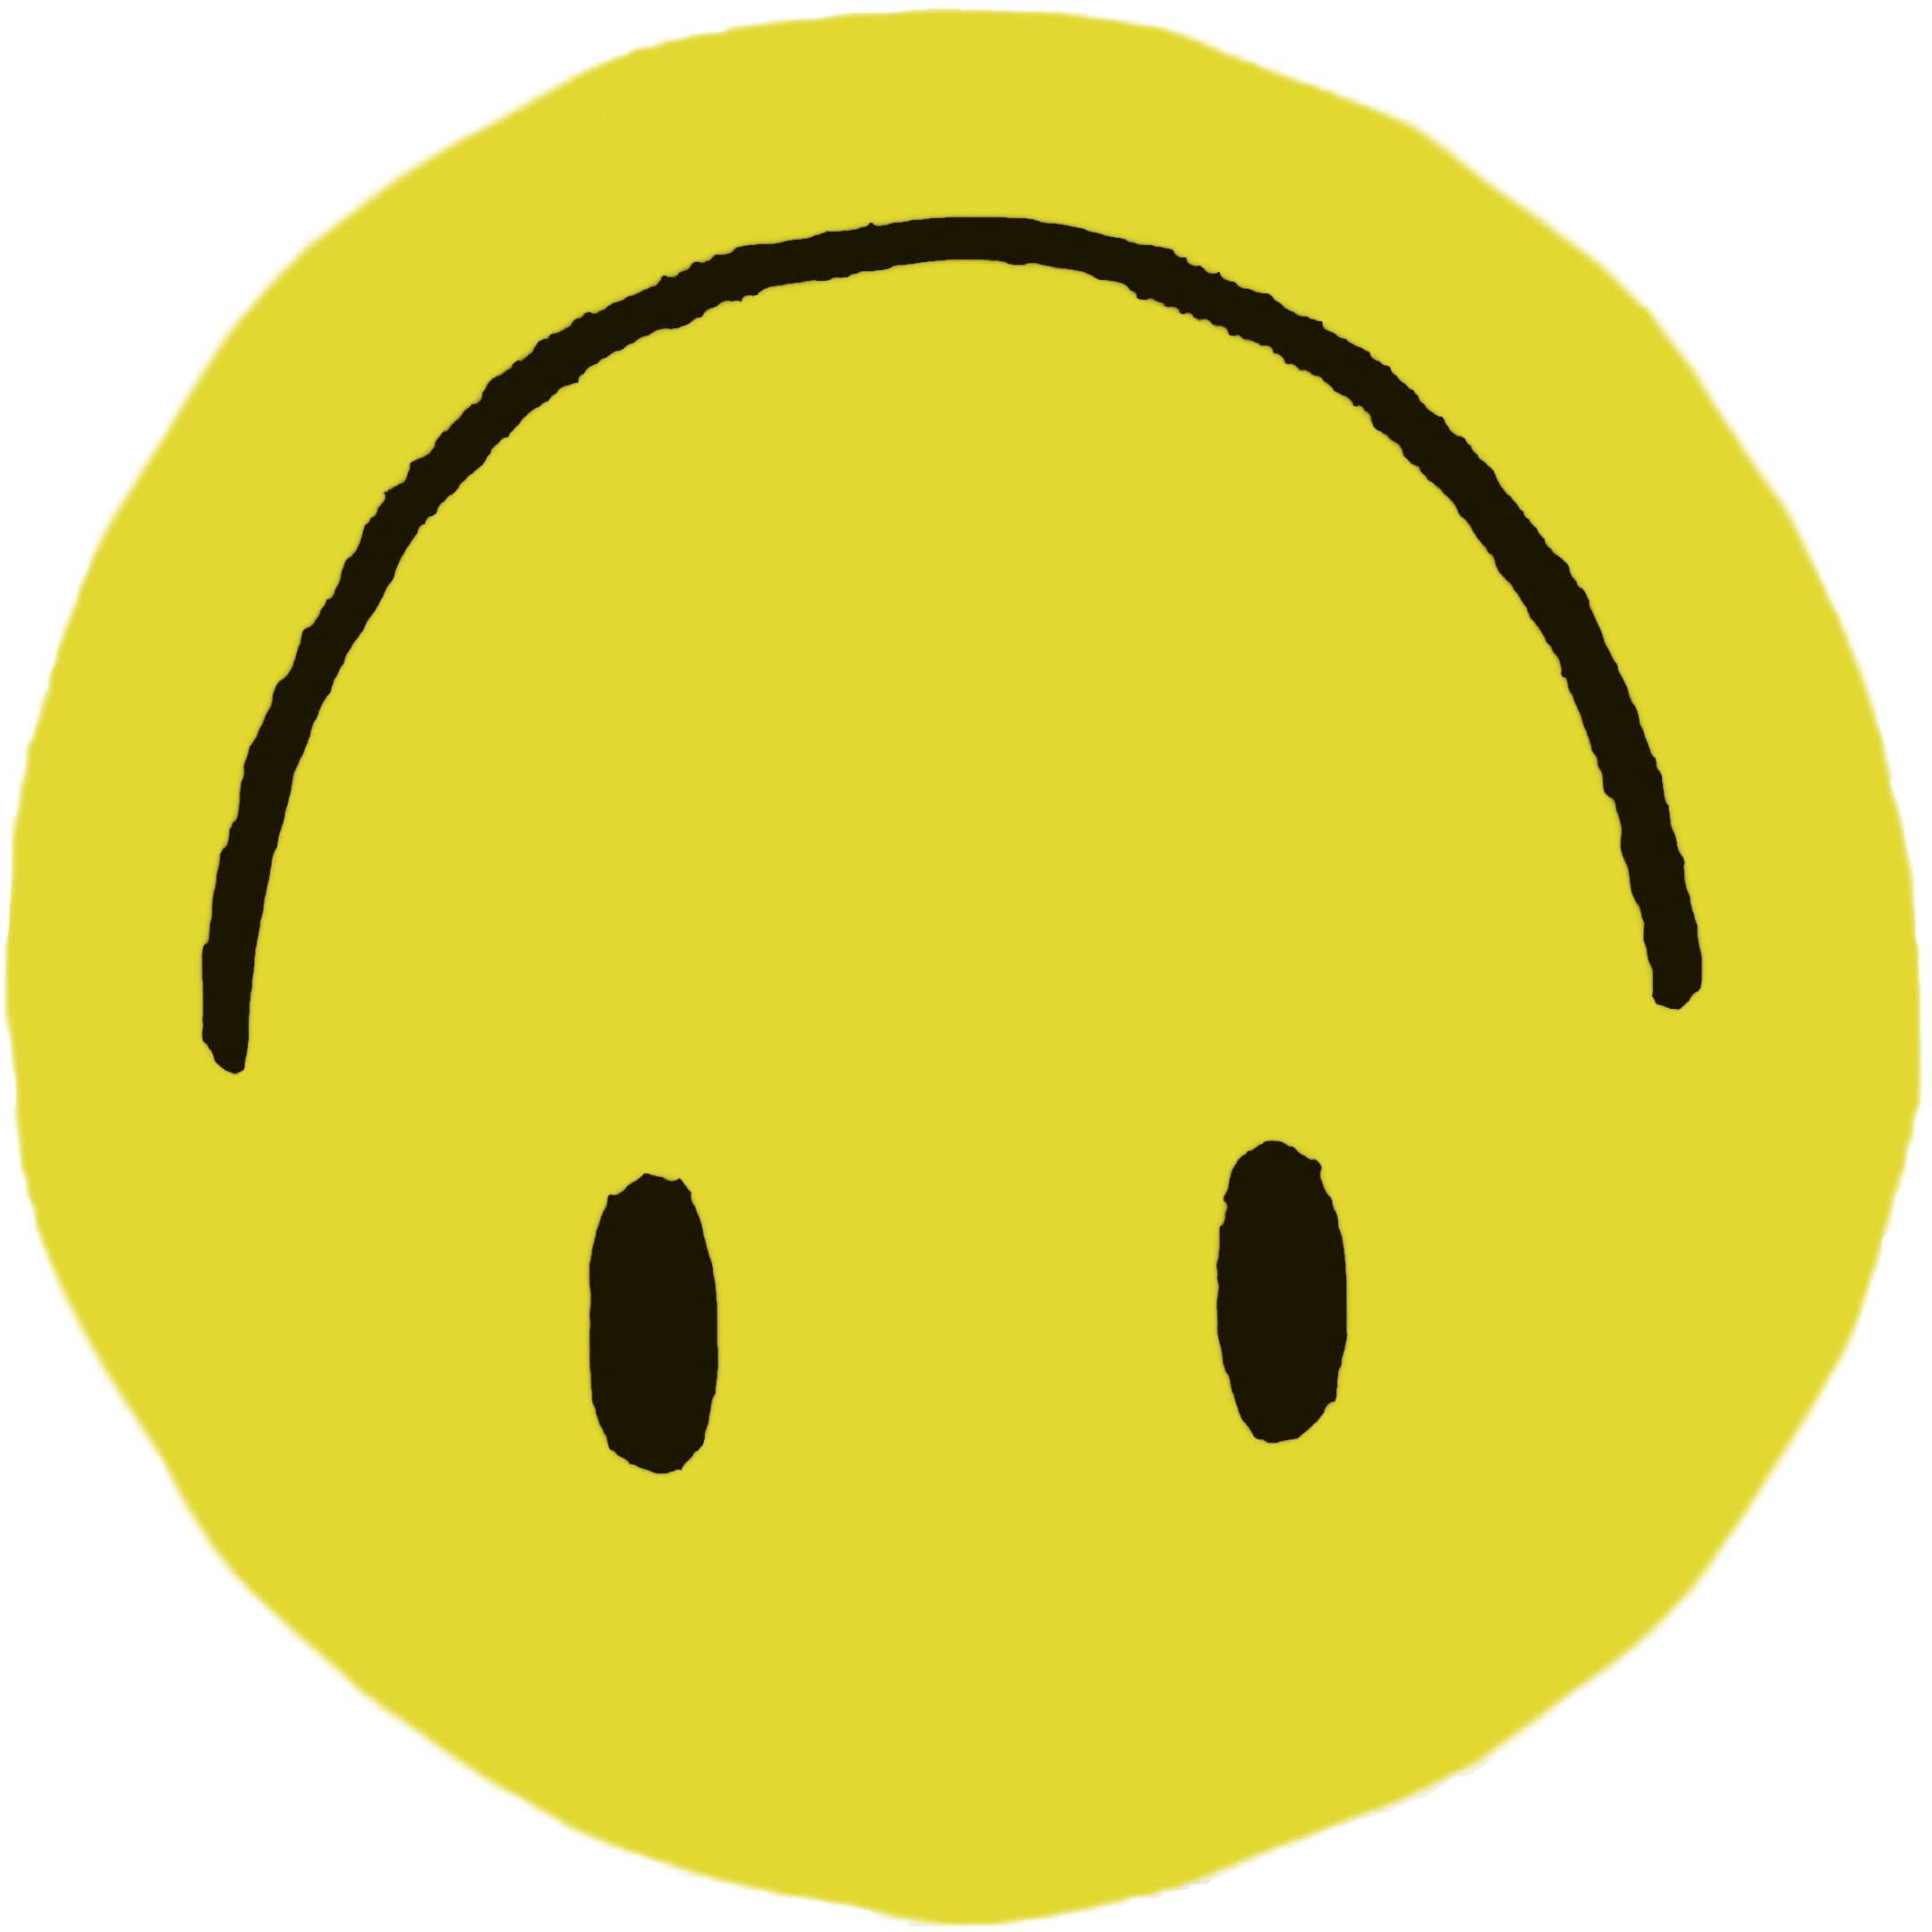 Recreated the Fake Happy smiley I did a while back, now in 4k (both jpg and png)